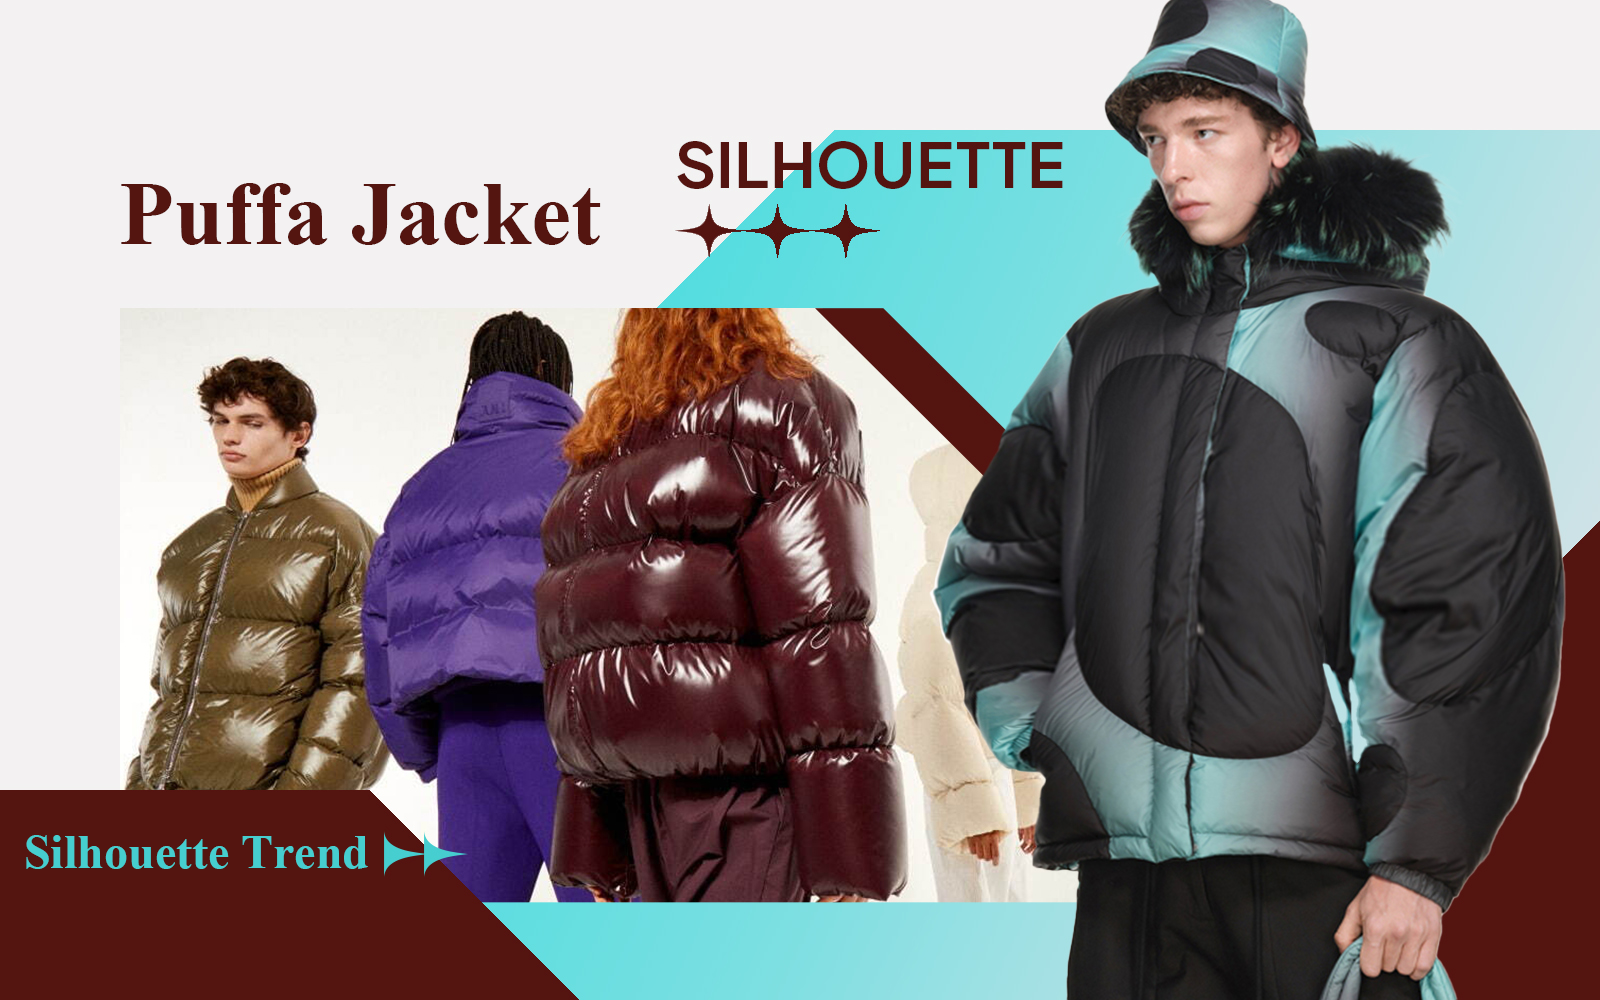 The Silhouette Trend for Men's Puffa Jacket